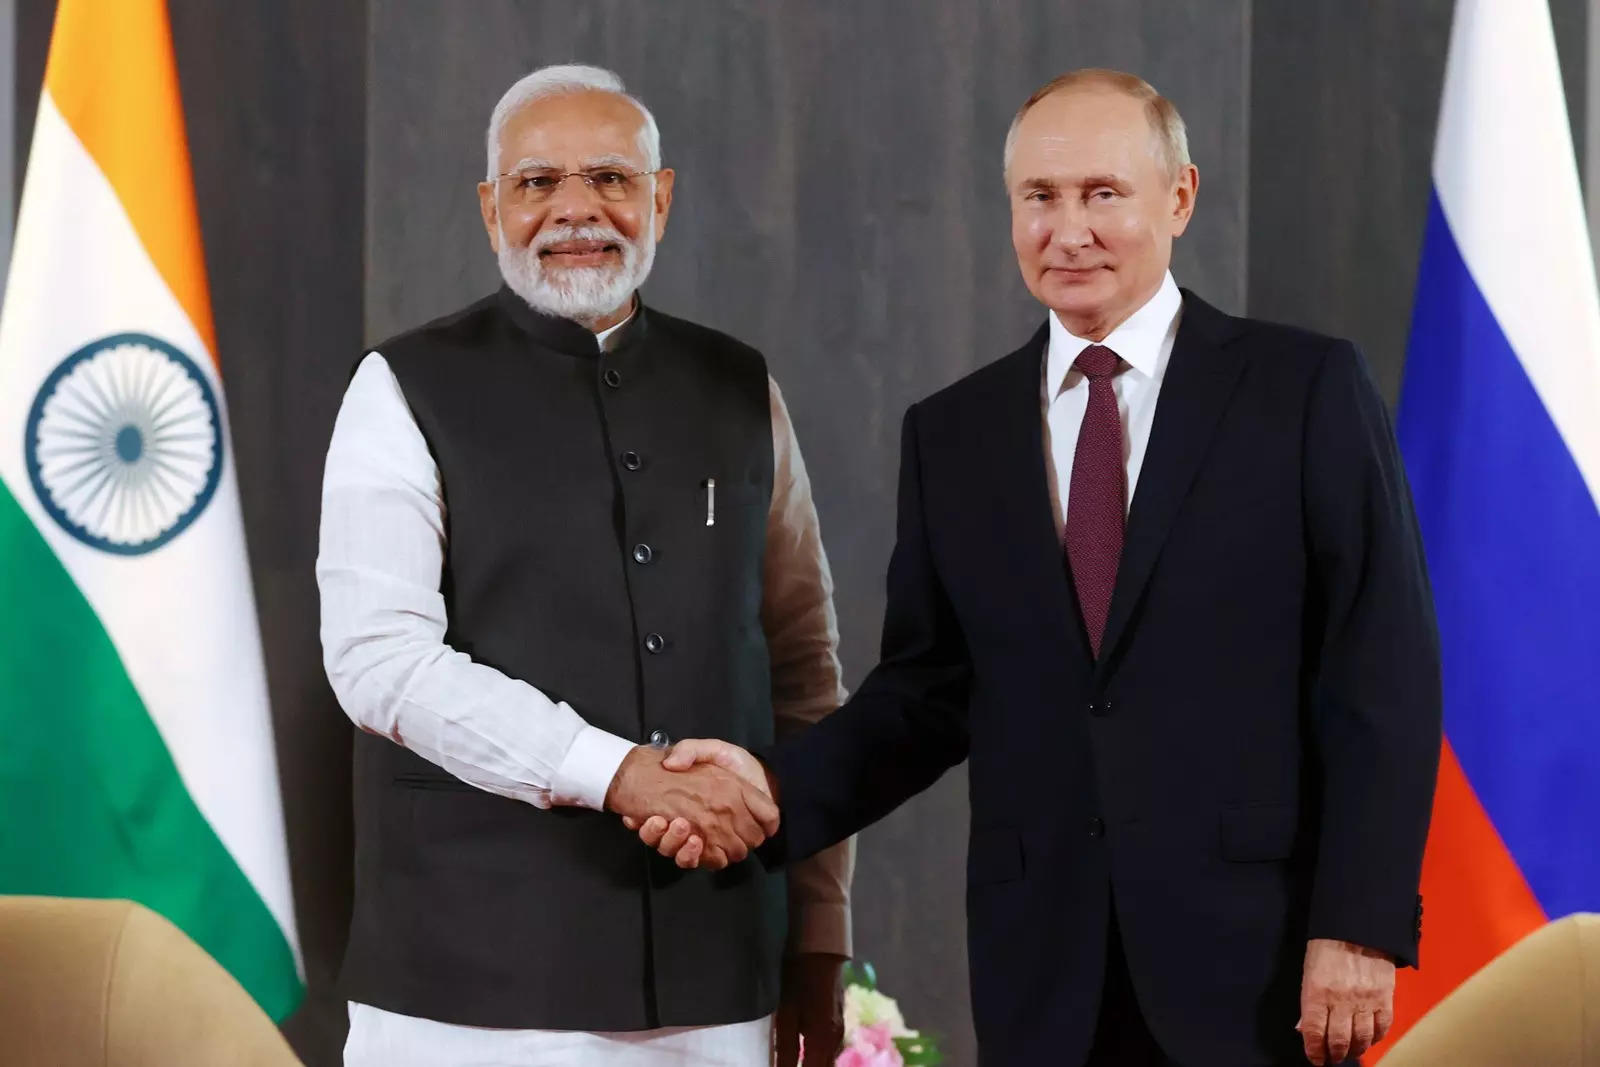 Putin conveys inability to attend G20 meet over call with PM Modi